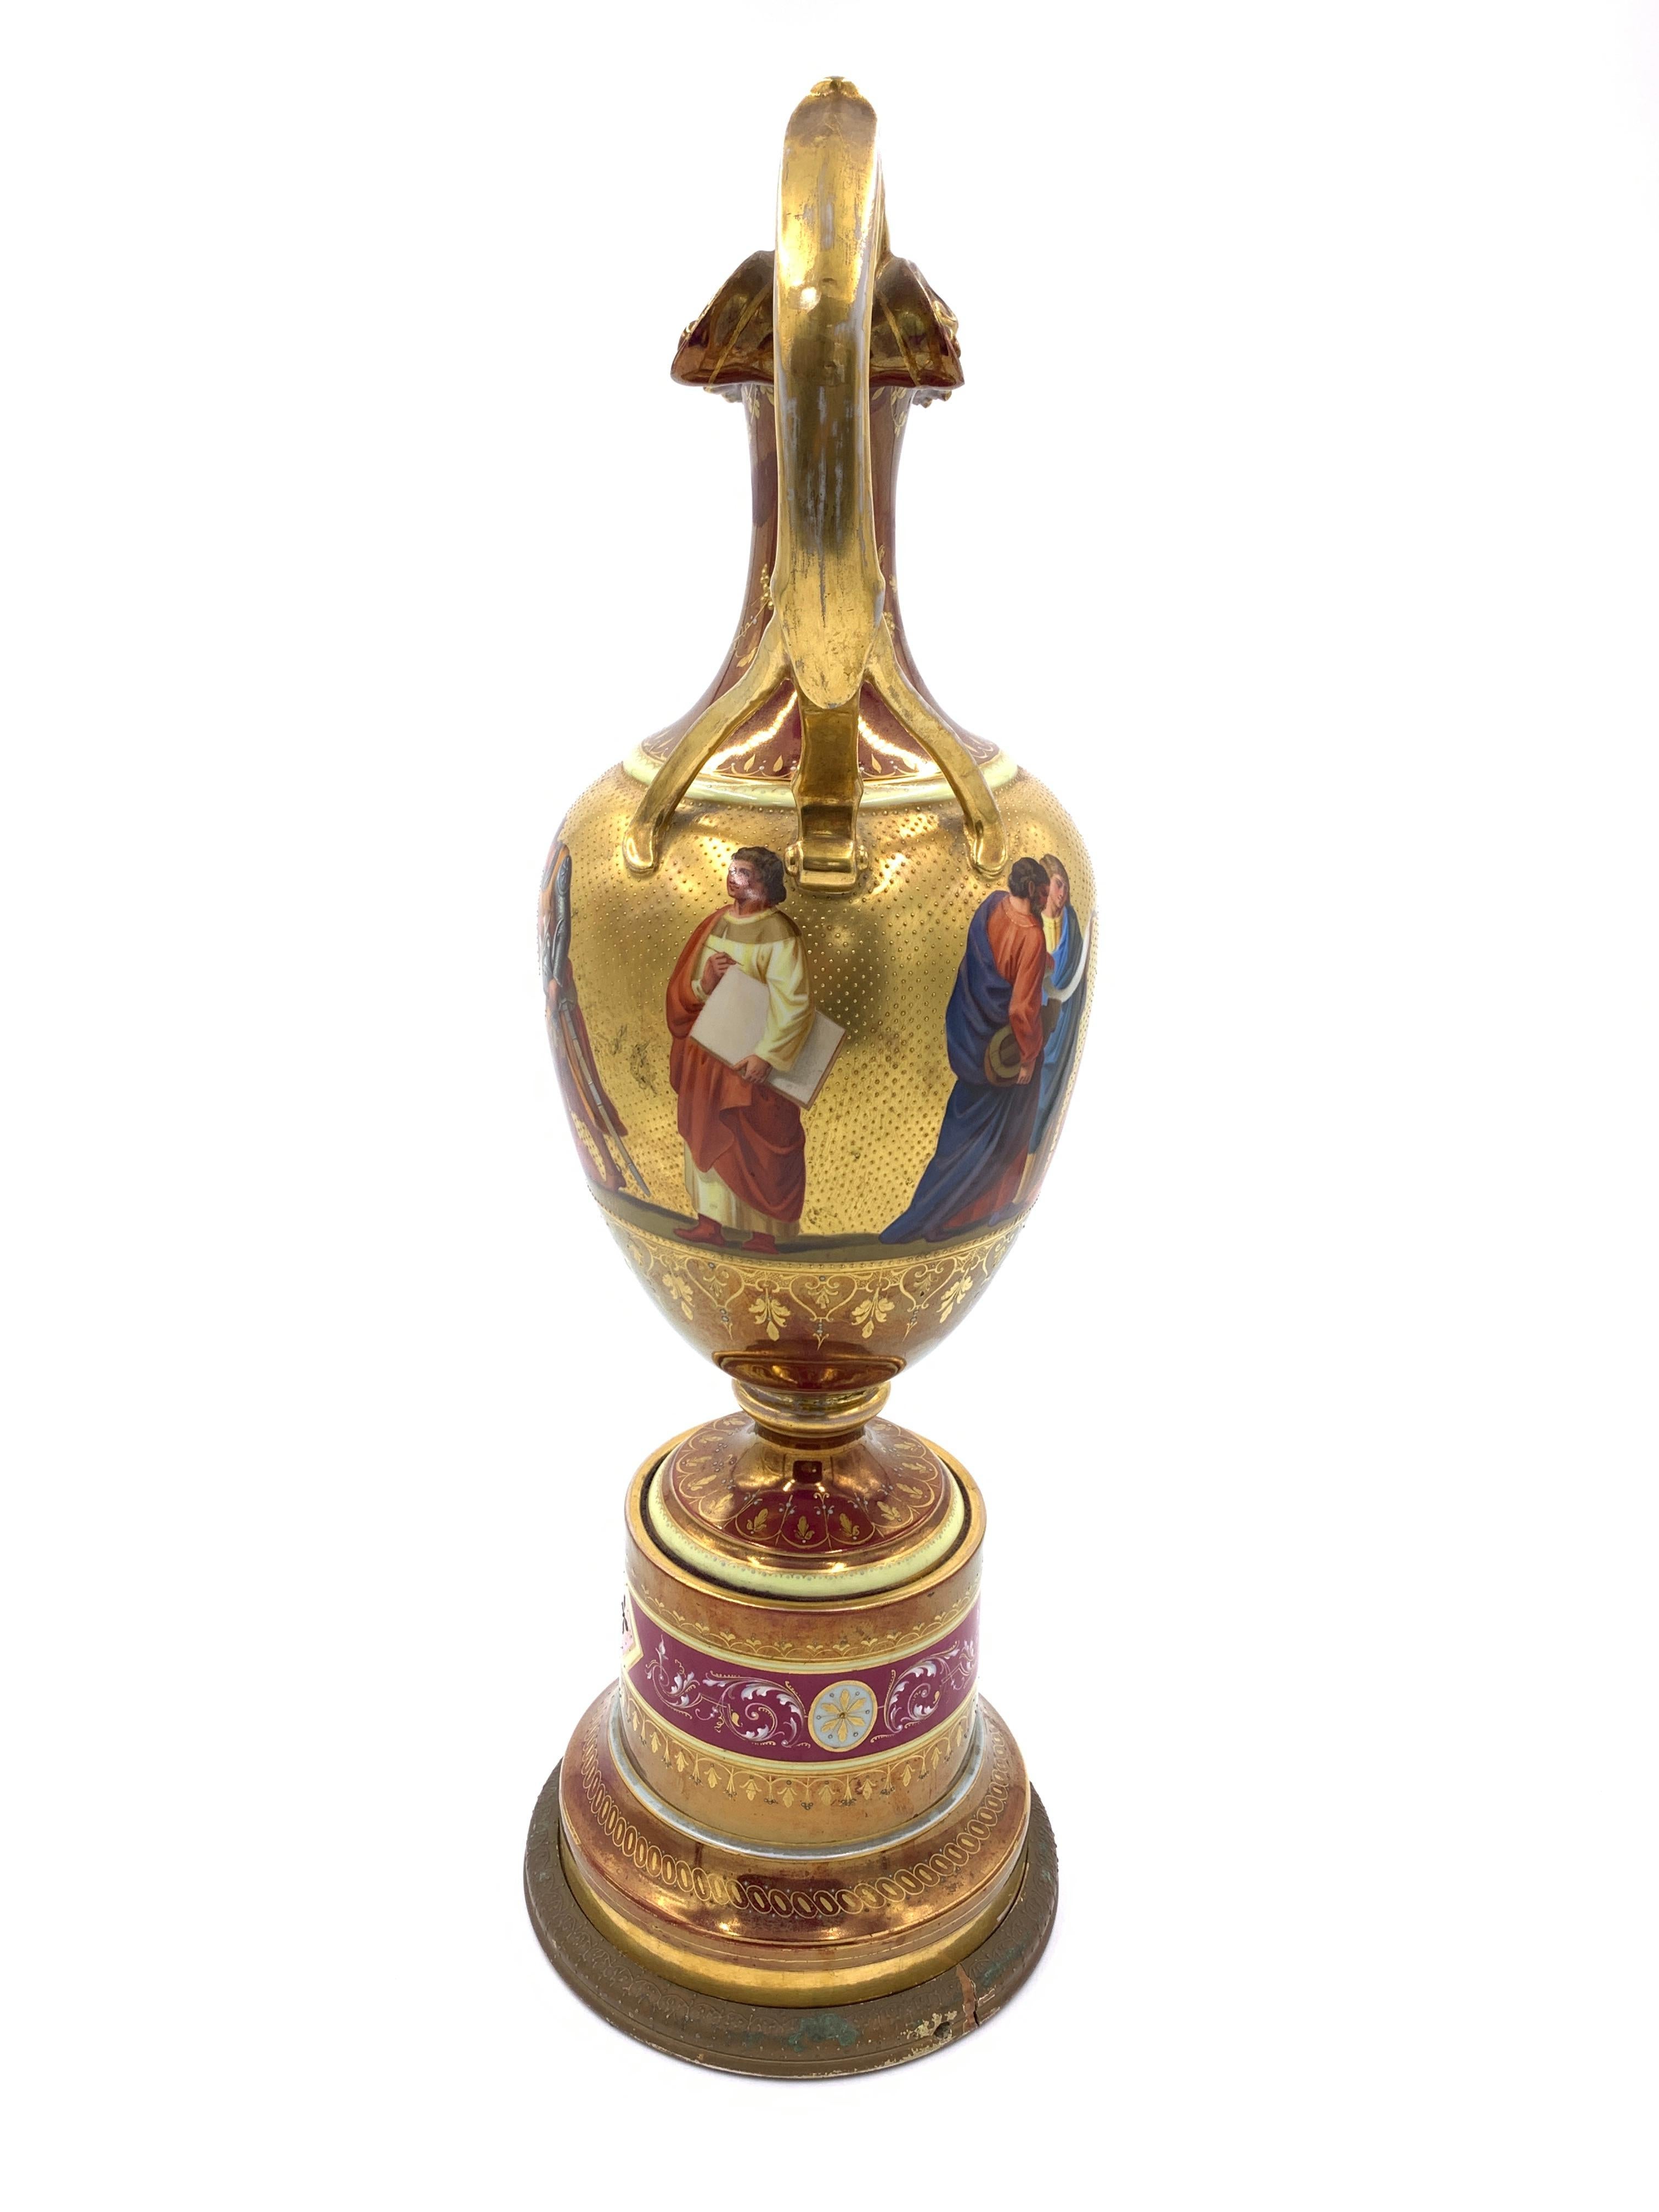 A fine quality 19th Century Vienna porcelain Ewer on stand with burgundy and gilded decoration.
 